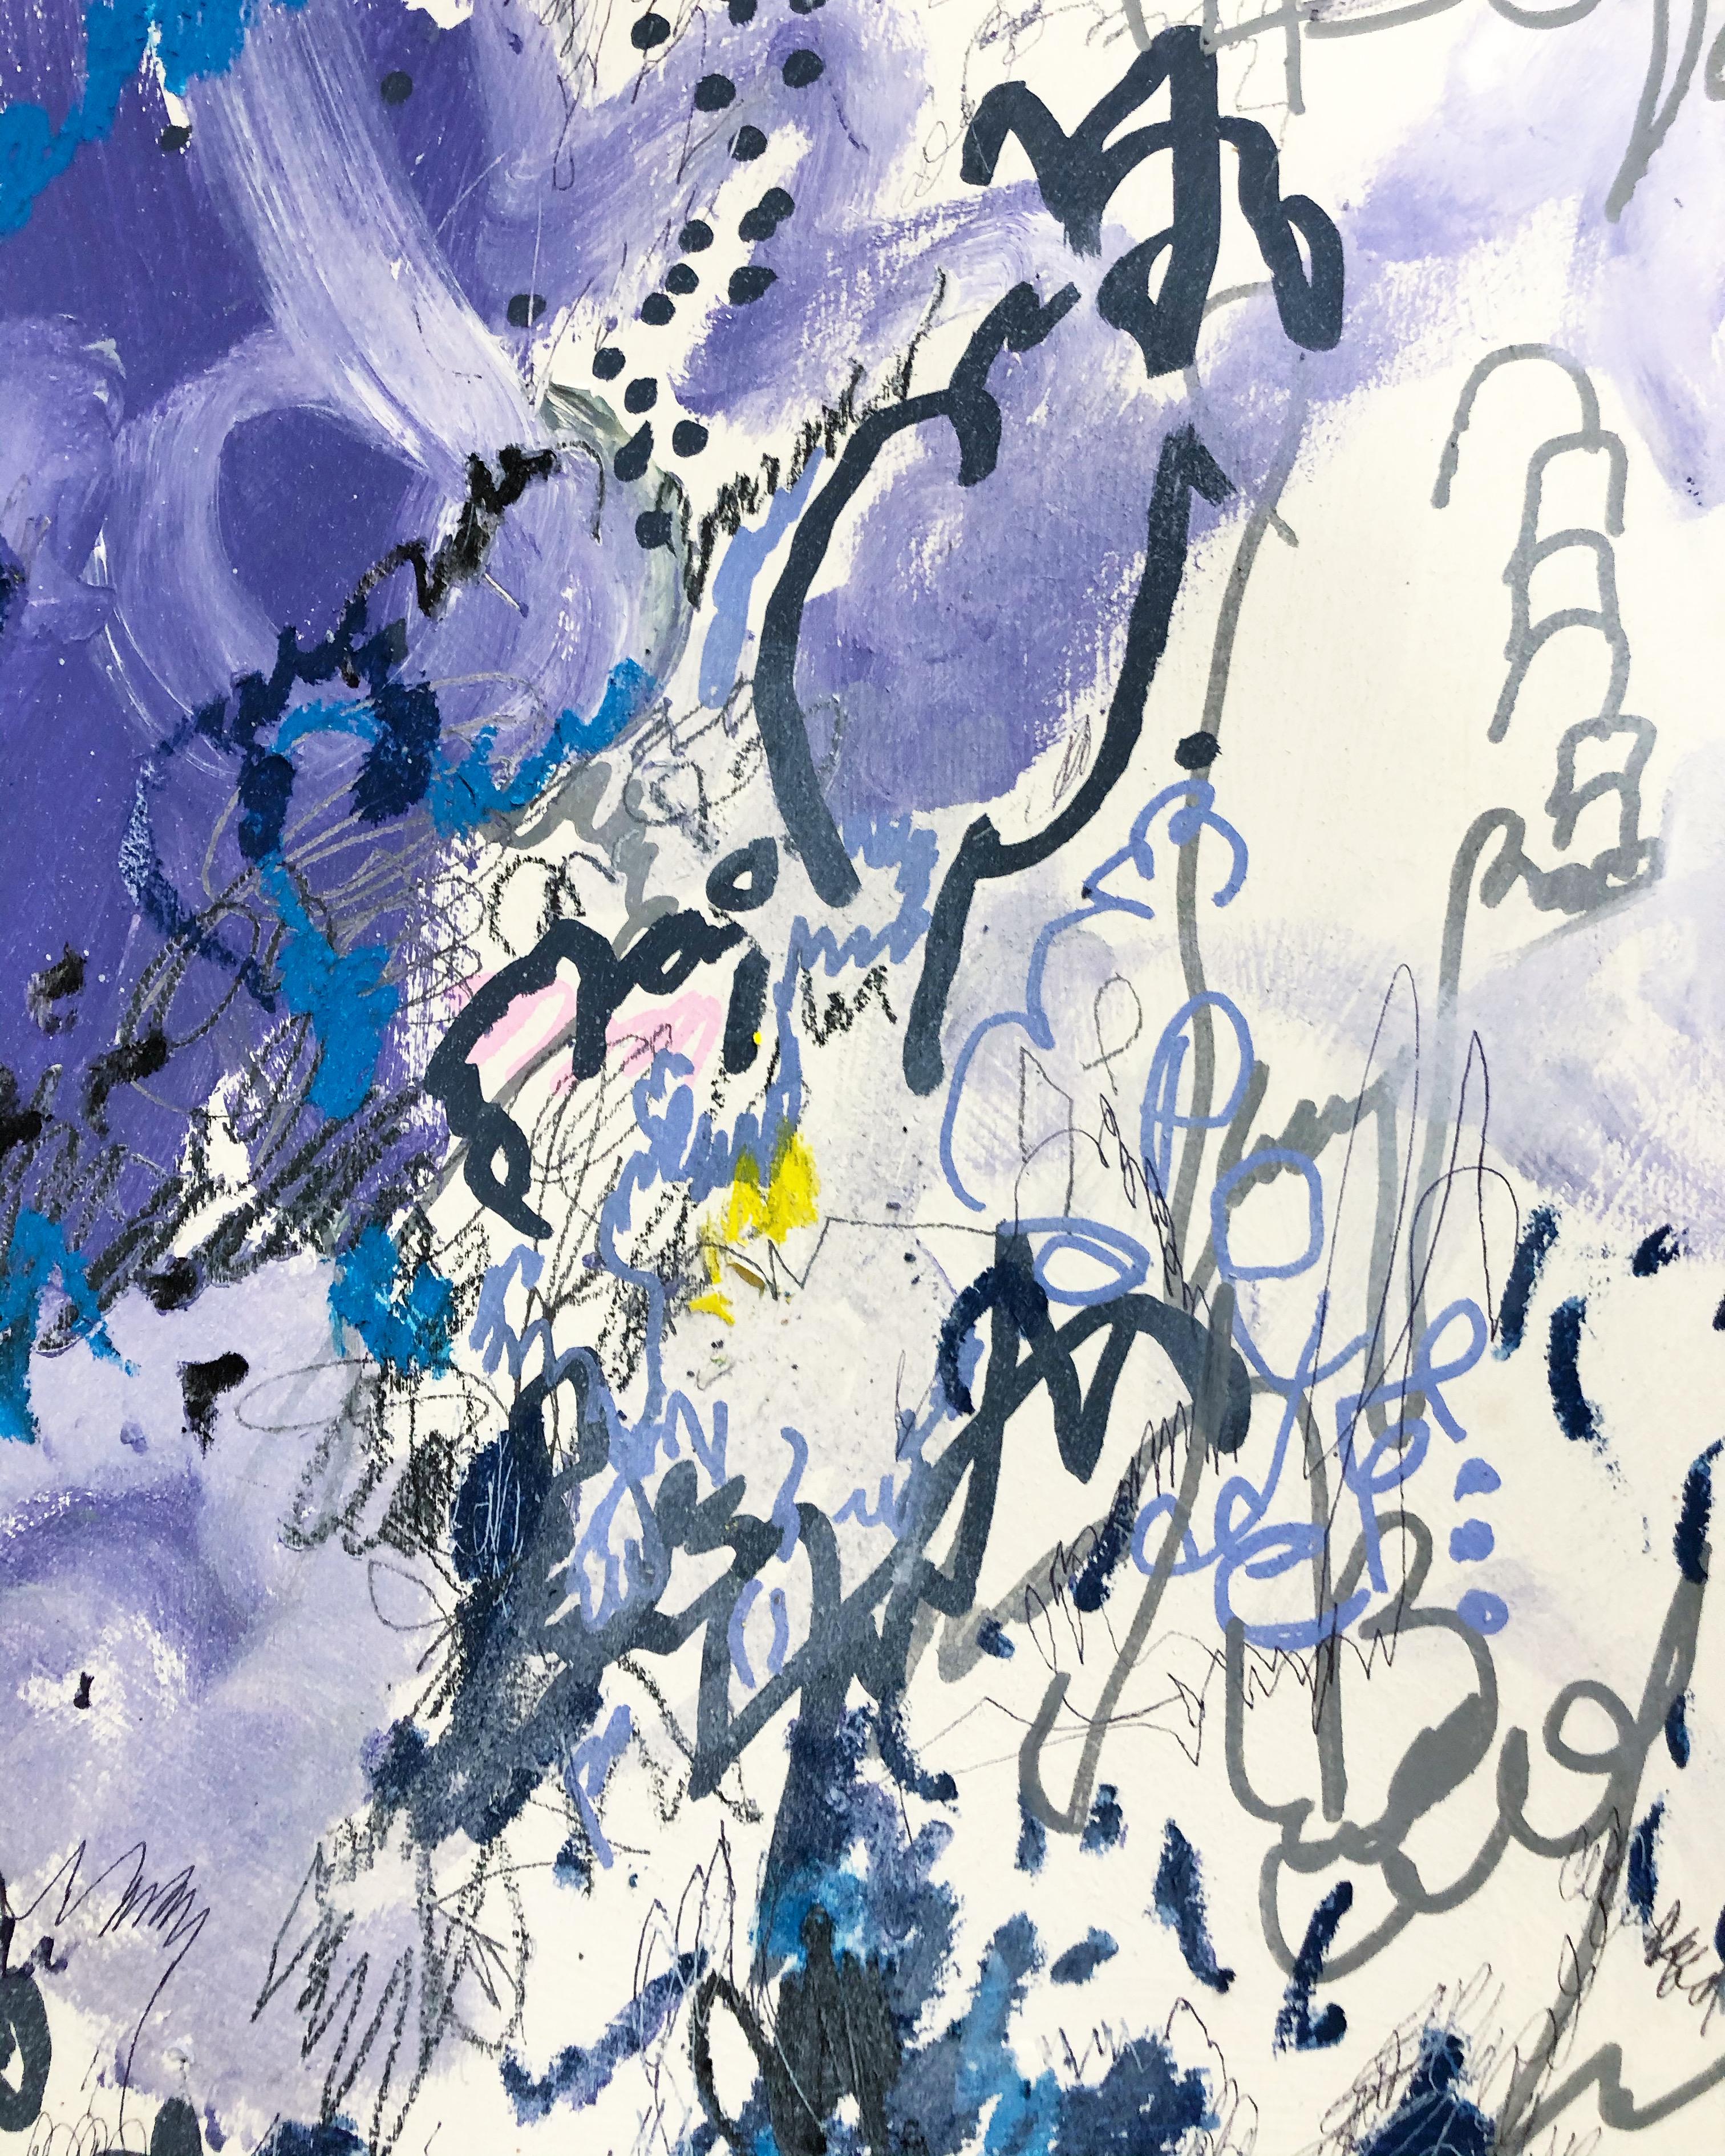 In “Existential Drama”, American Emerging Artist Millie Weeks works in Acrylic Paint, Gesso, Oil Pastel, Pencil, Spray Paint and Permanent Marker on Wood in order to create a diverse piece with a focus on movement and small details. Through this